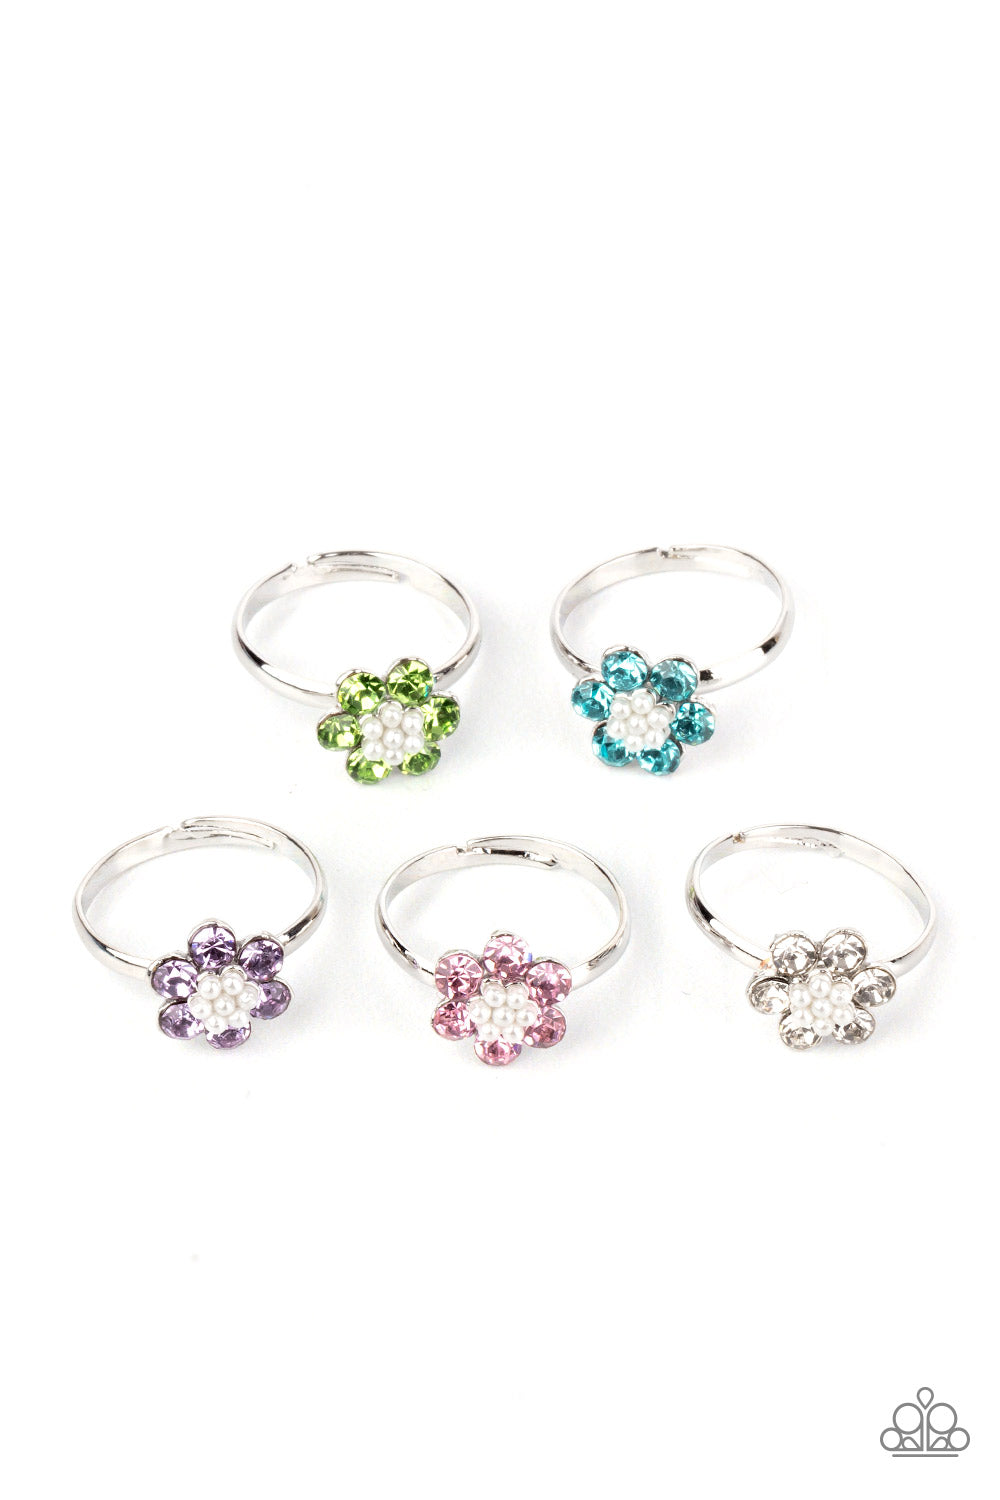 ♥ Starlet Shimmer Rings ♥ Pack of 5 Rings ♥ Paparazzi ♥